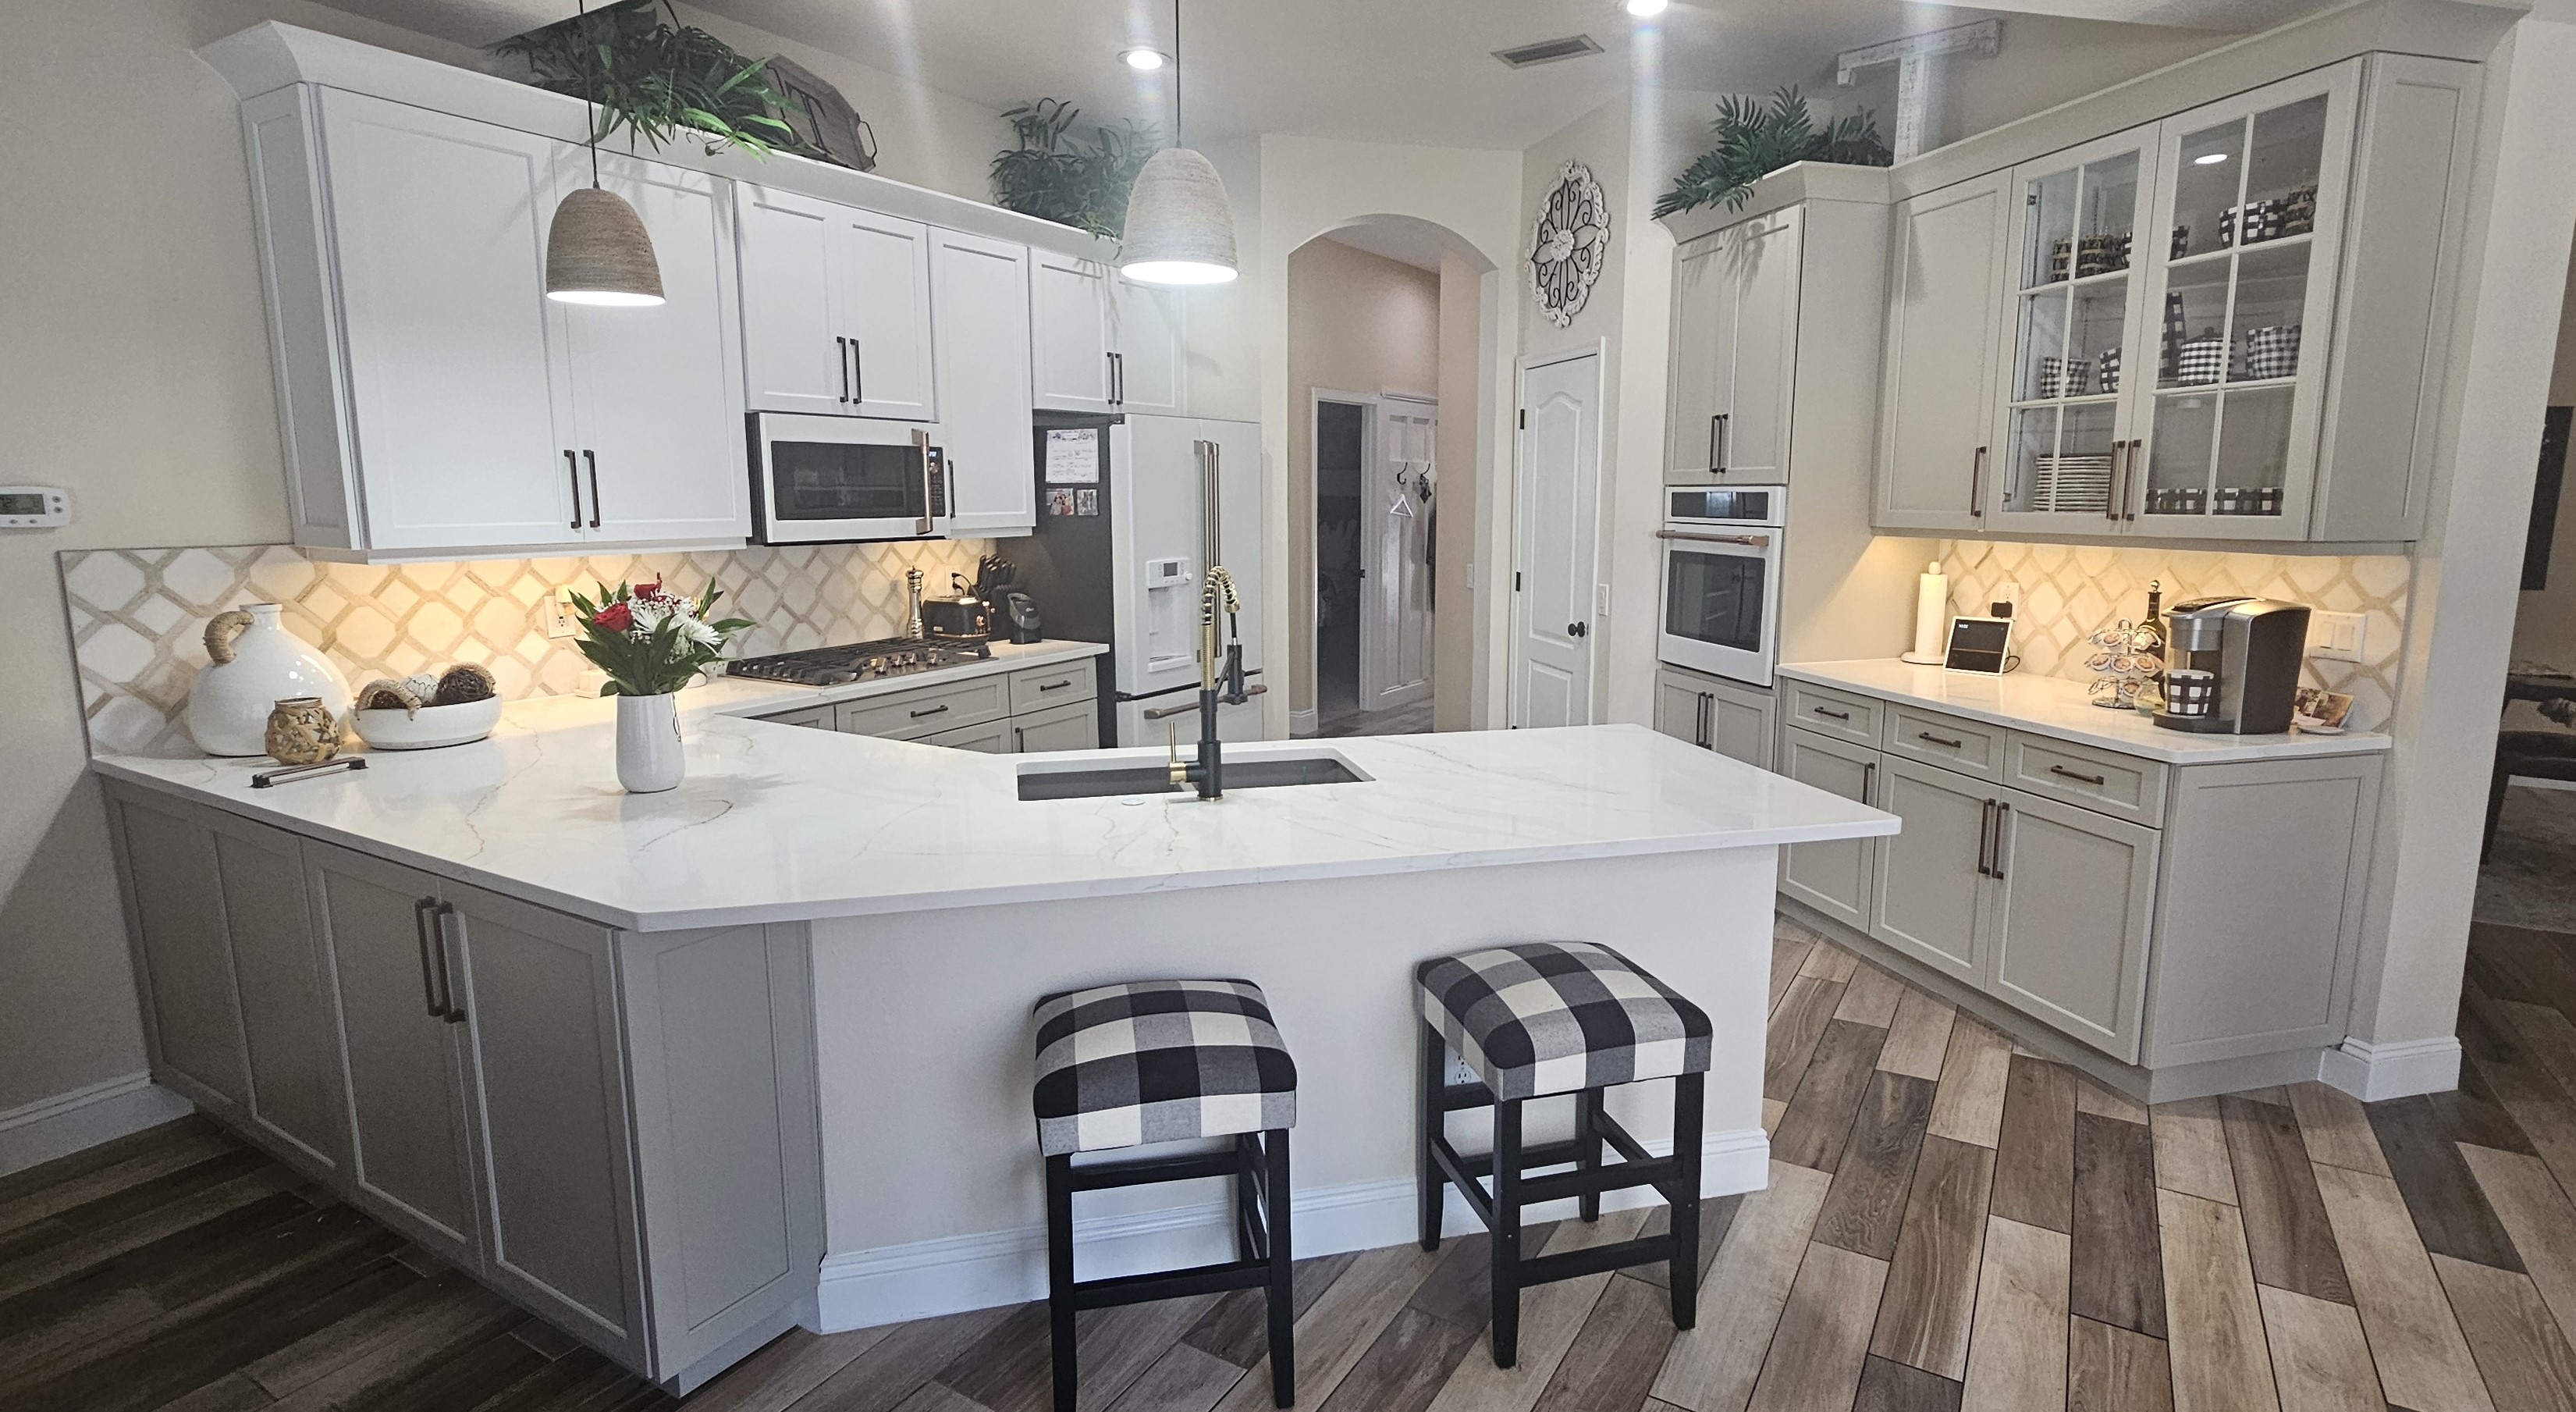 Modern appliances with a high-quality finish, granite worktops, and sleek white kitchen cabinets in Westchase.